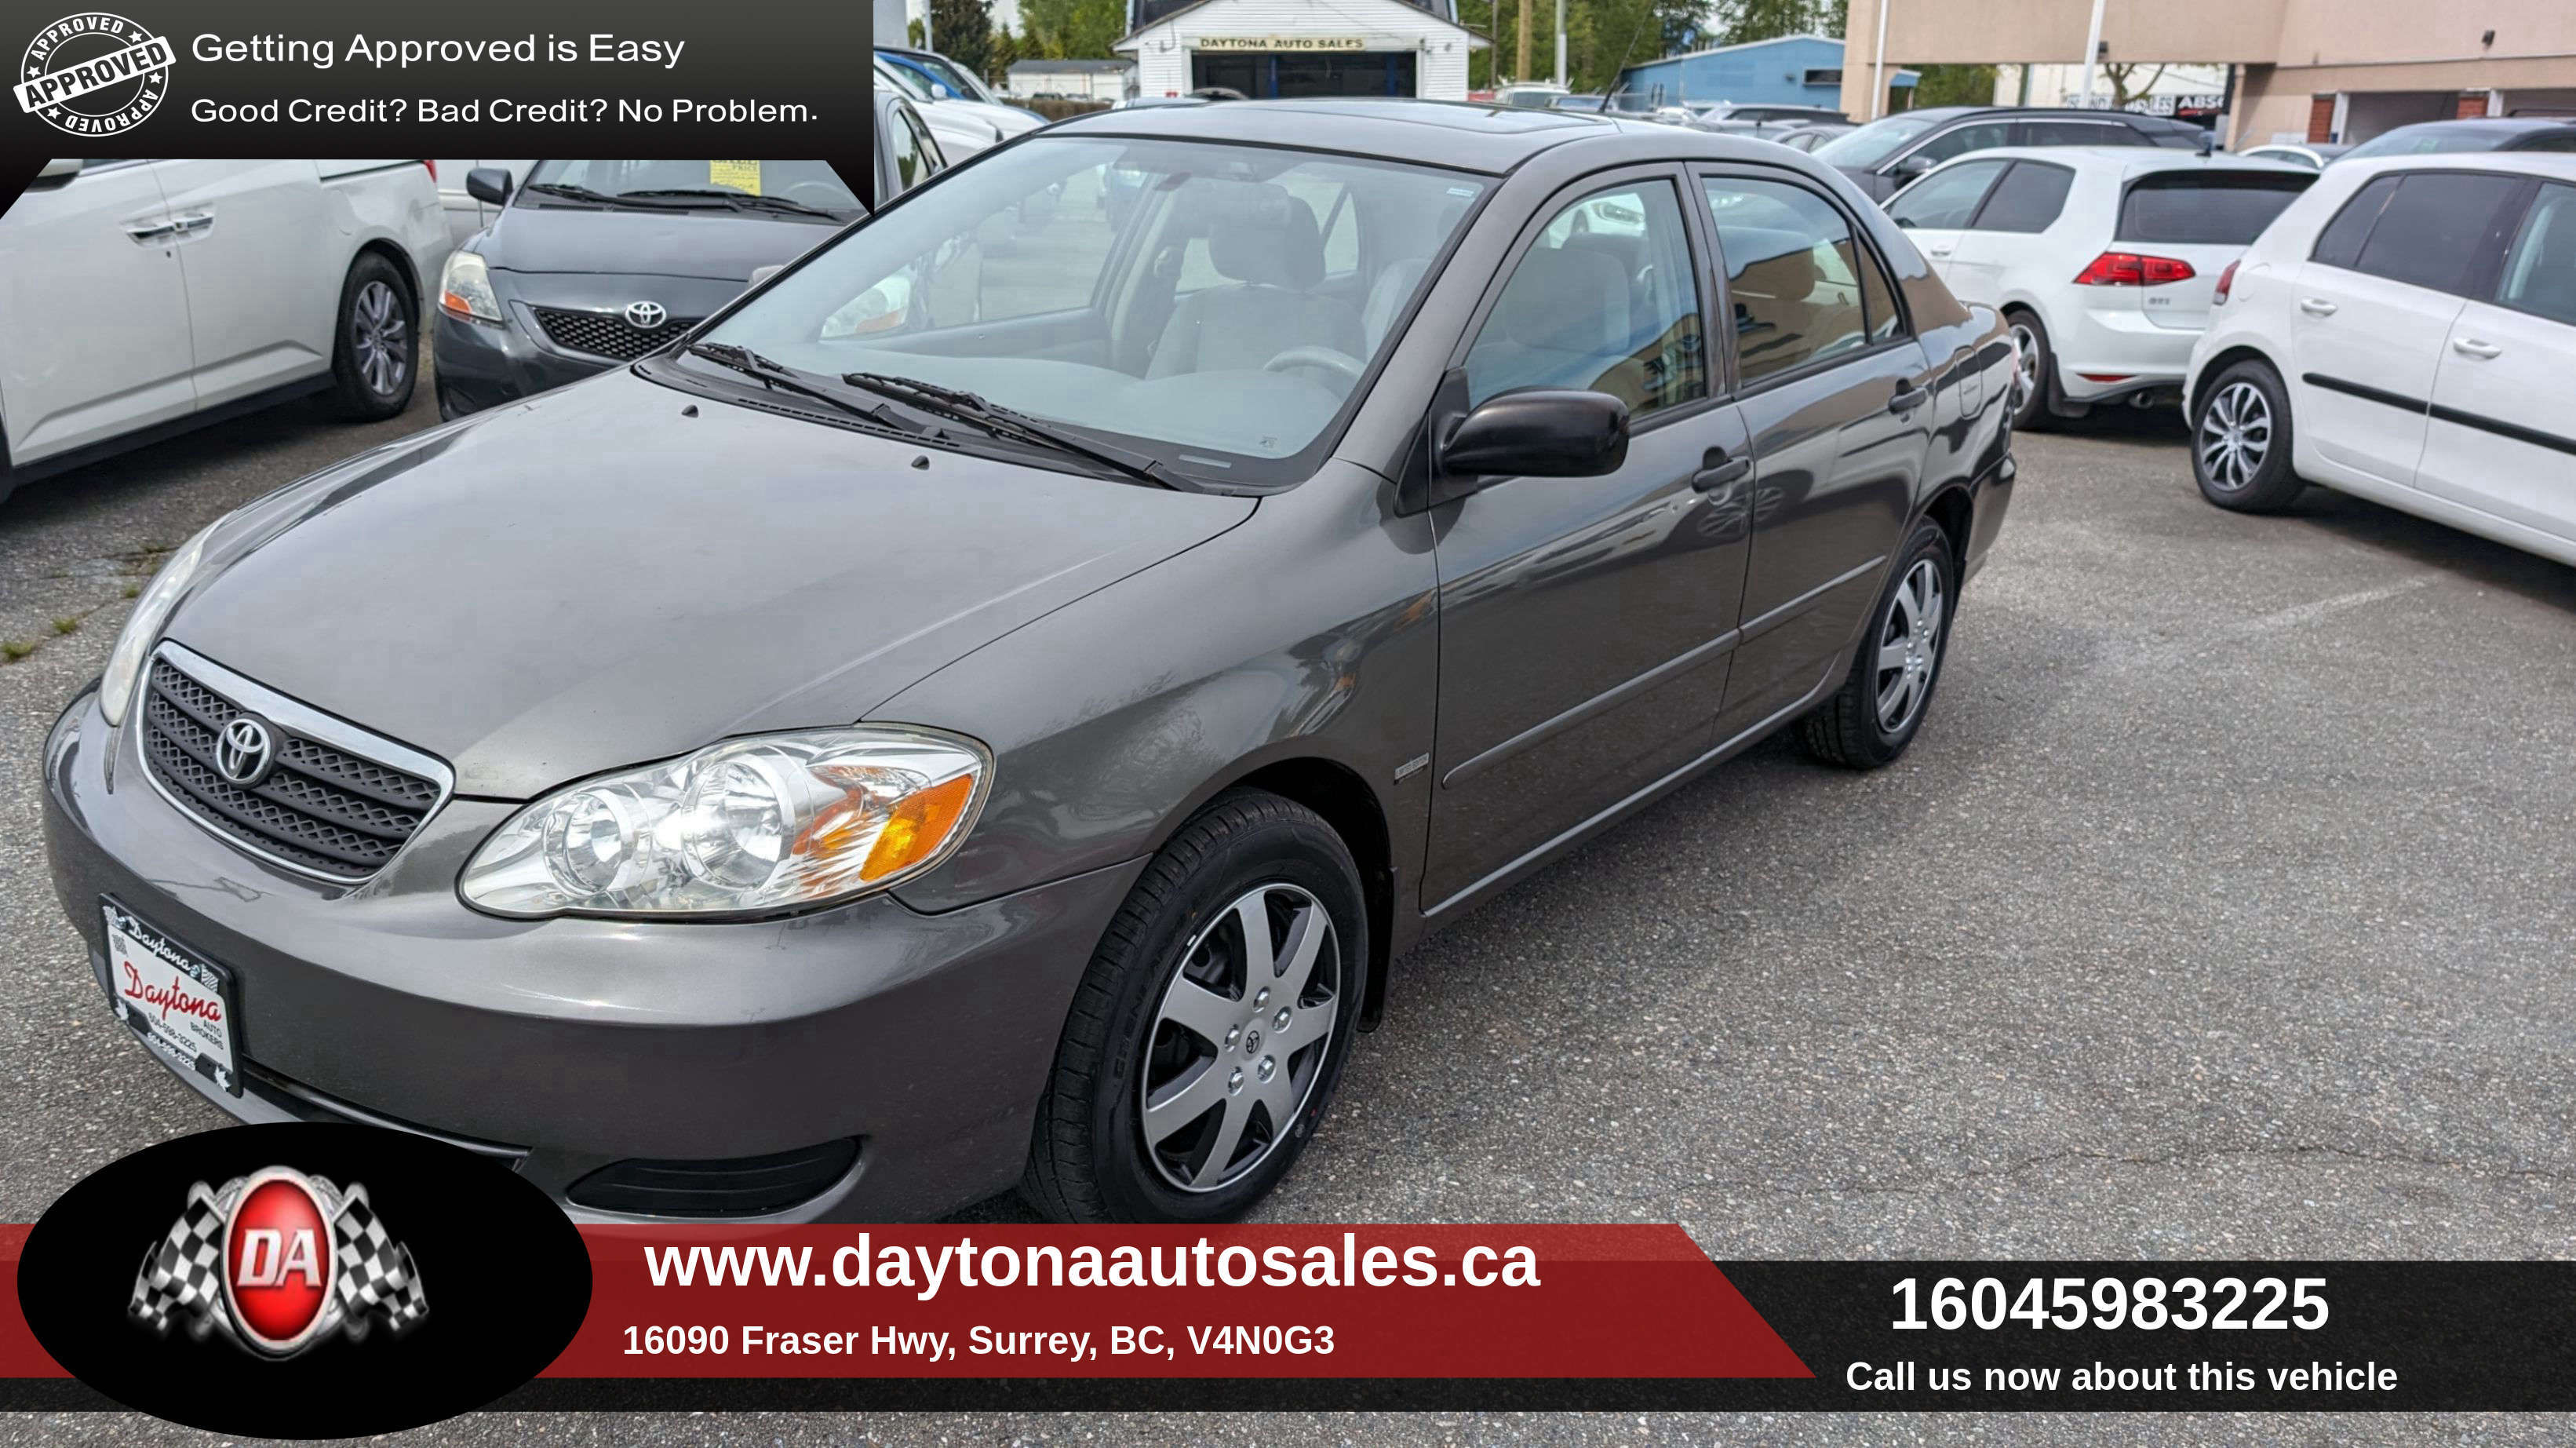 2008 Toyota Corolla 4dr Sdn Auto CE SE, sunroof, power group, key less